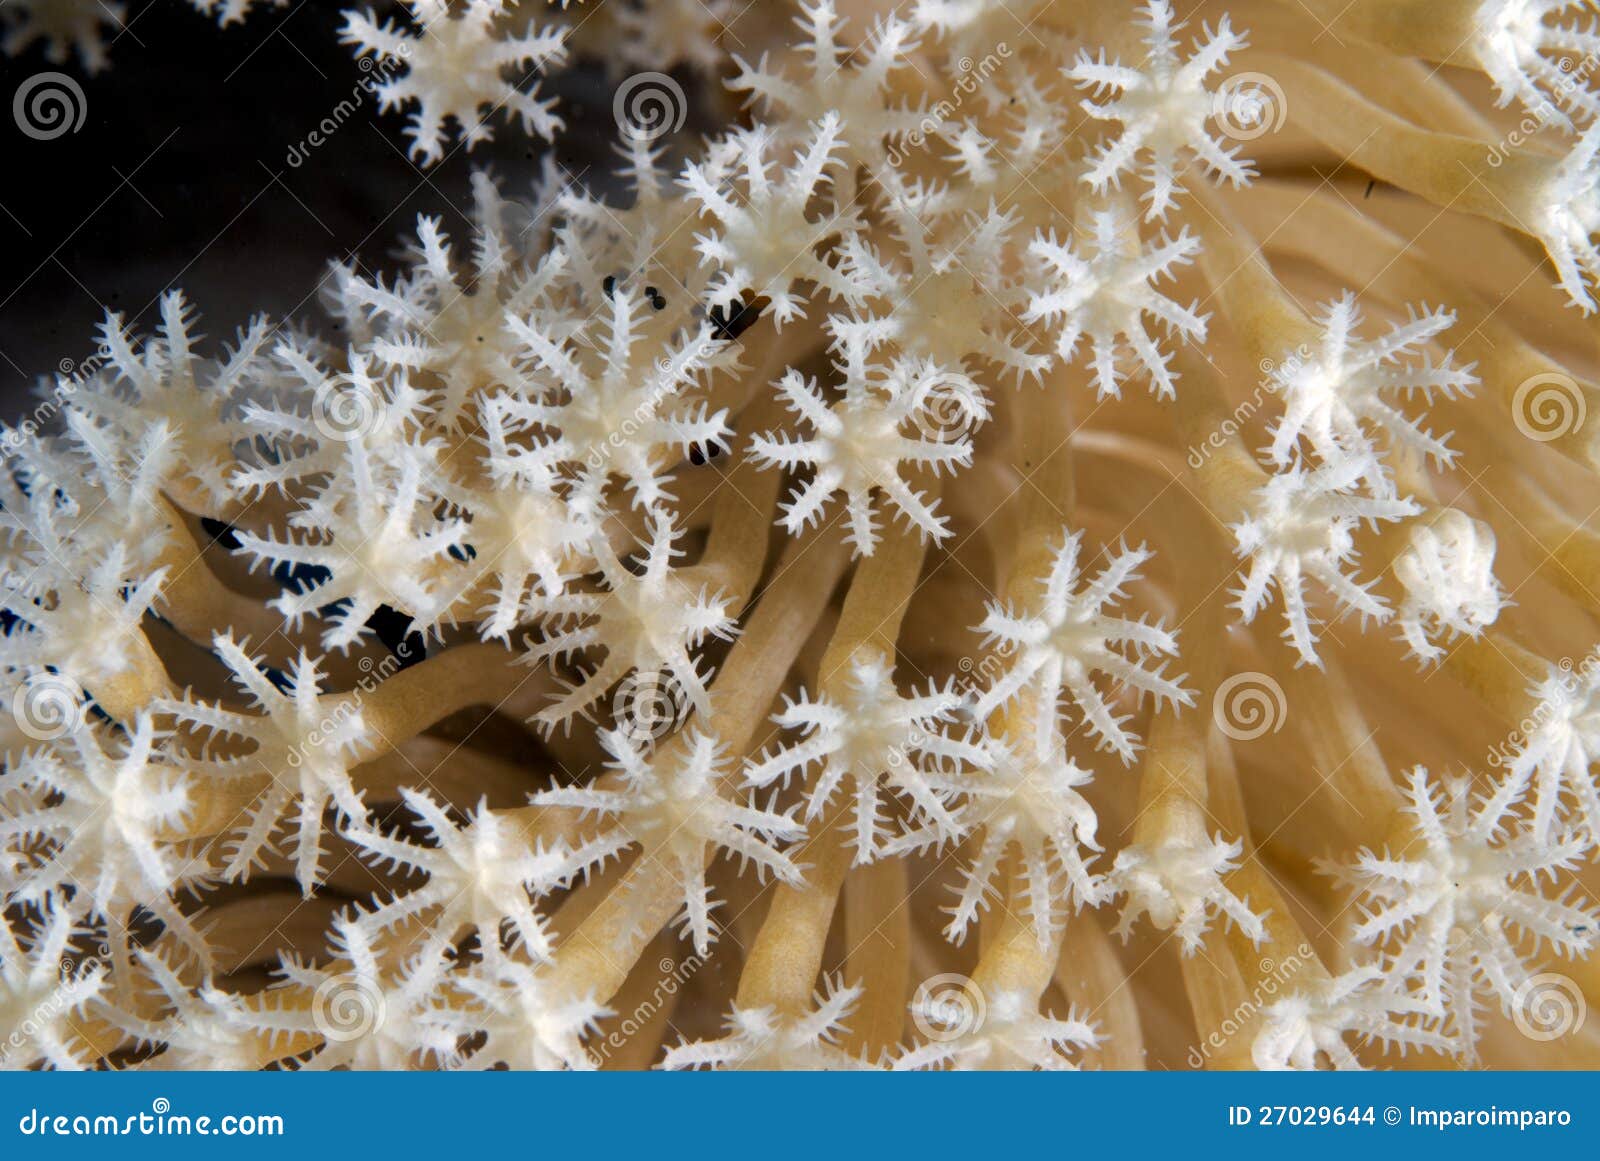 corals in reproduction